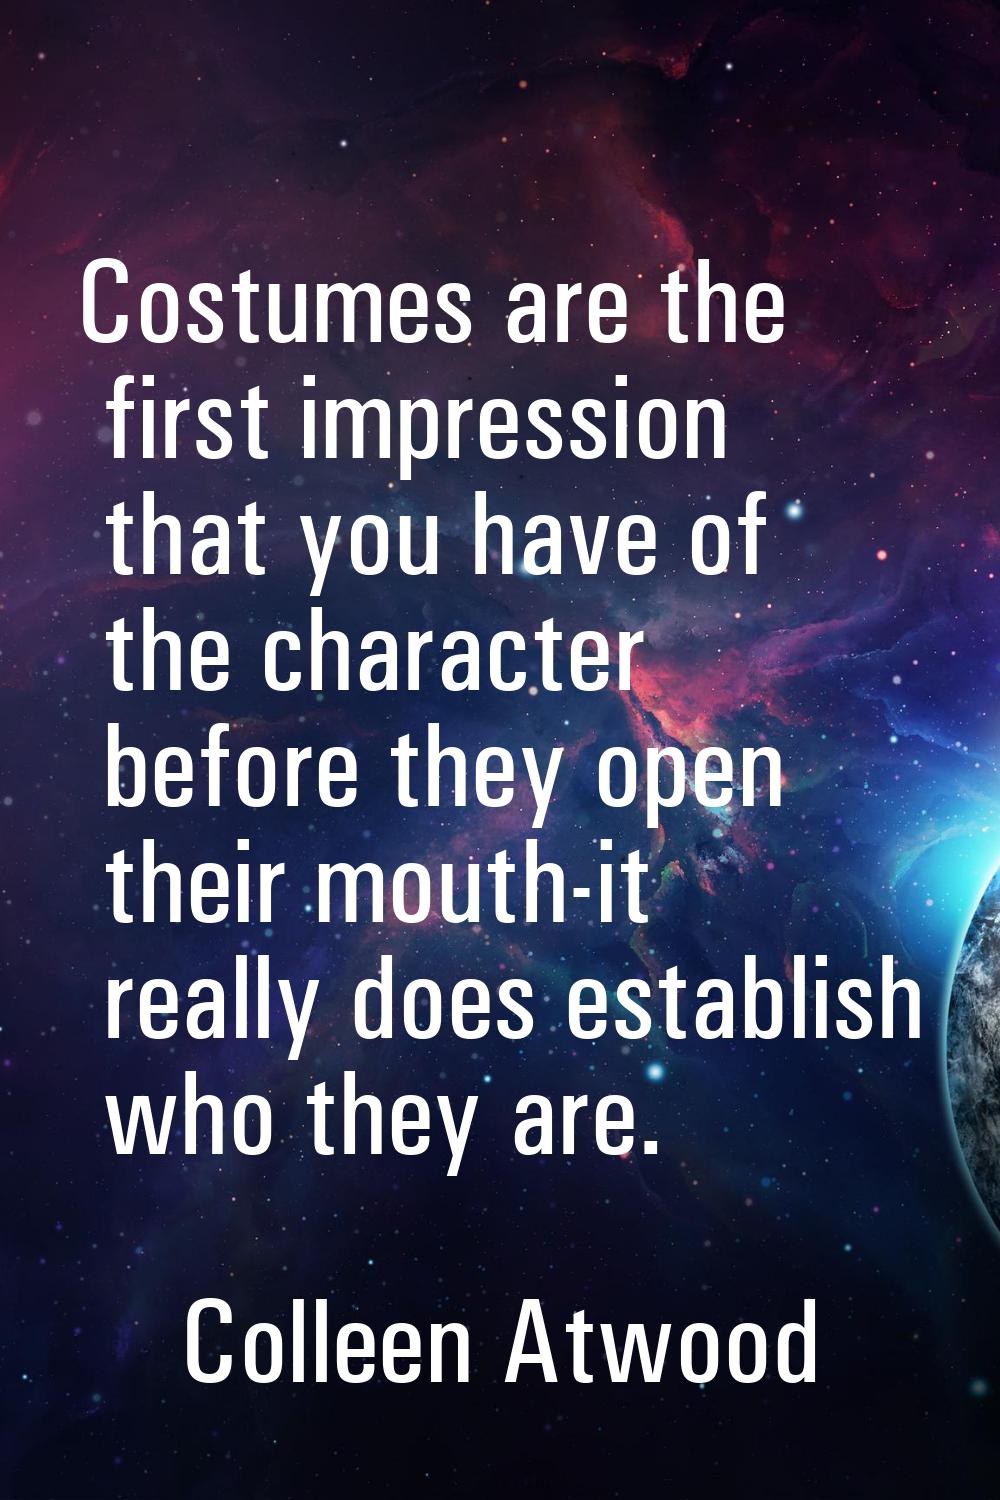 Costumes are the first impression that you have of the character before they open their mouth-it re